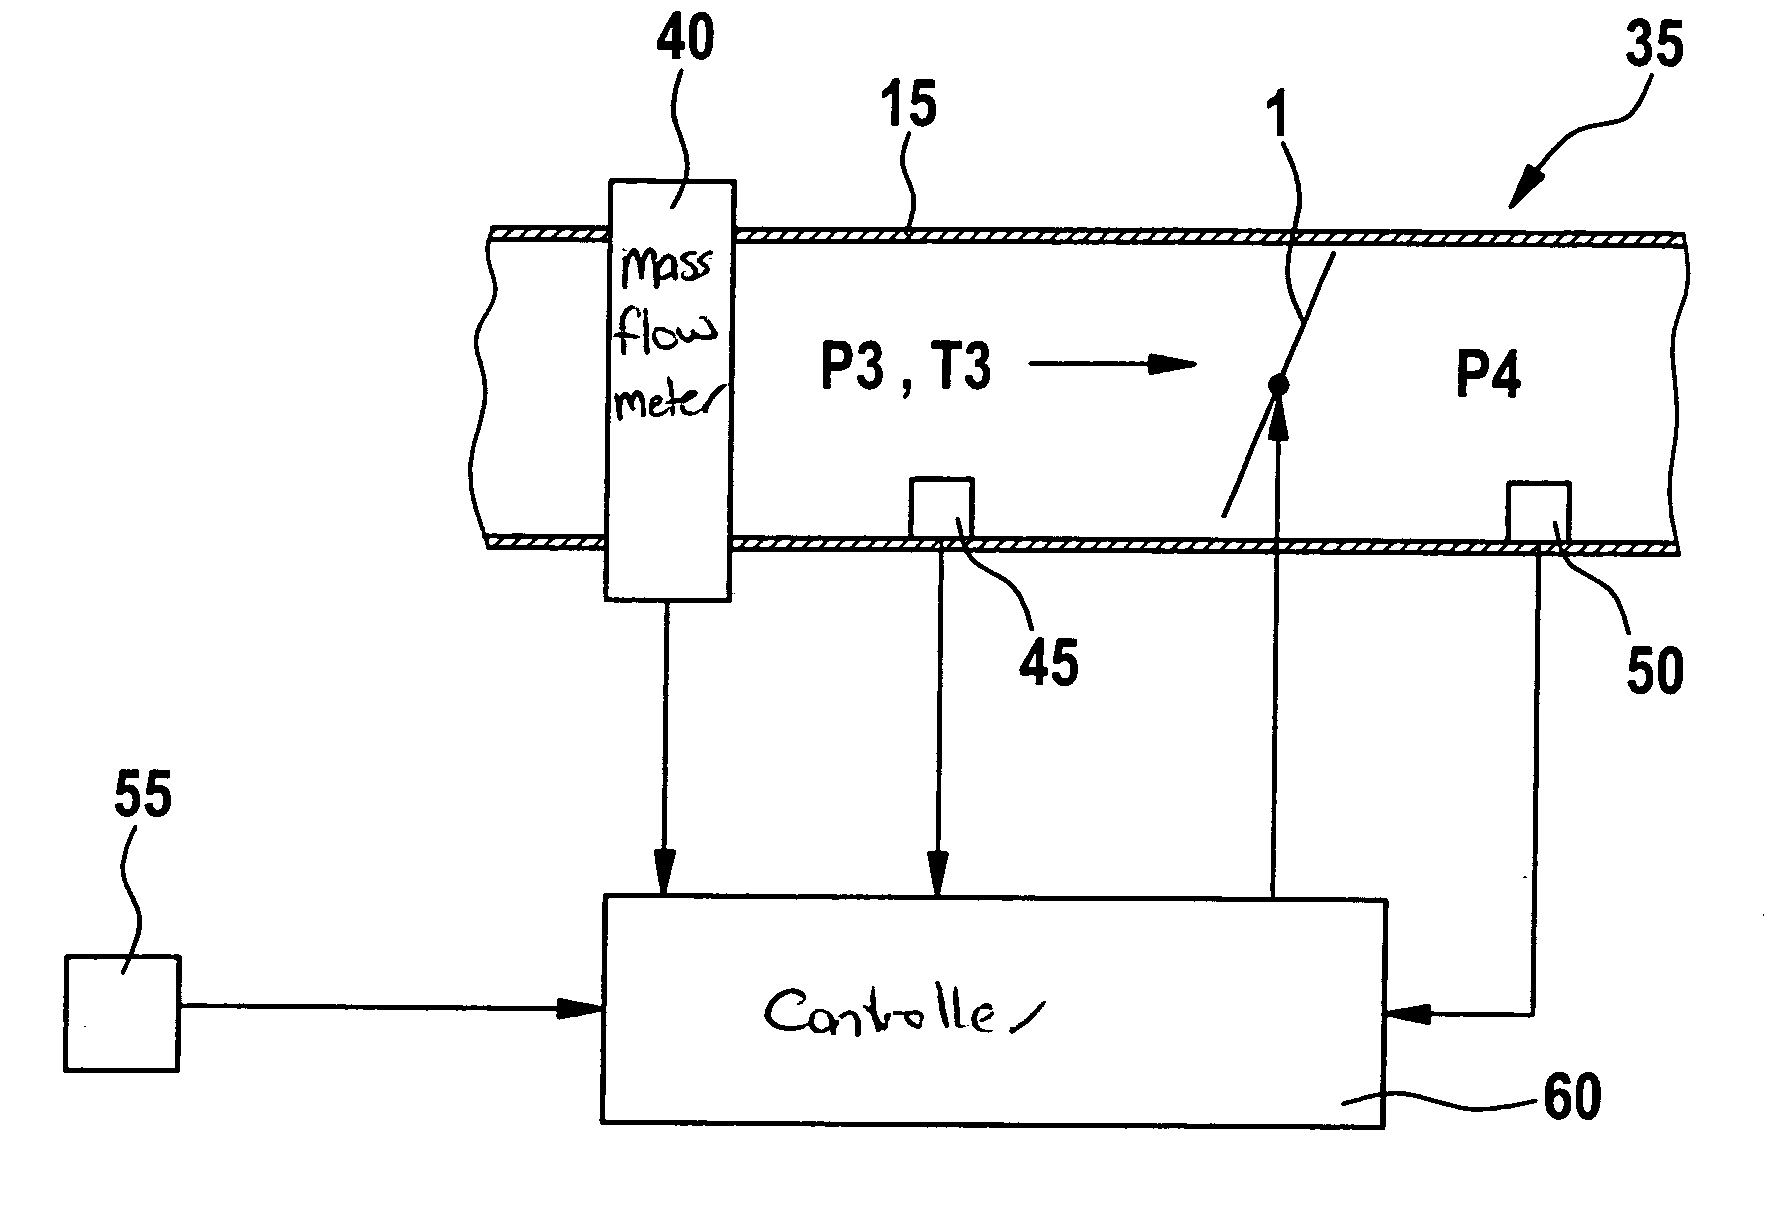 Method for controlling at least one actuator in a mass flow duct